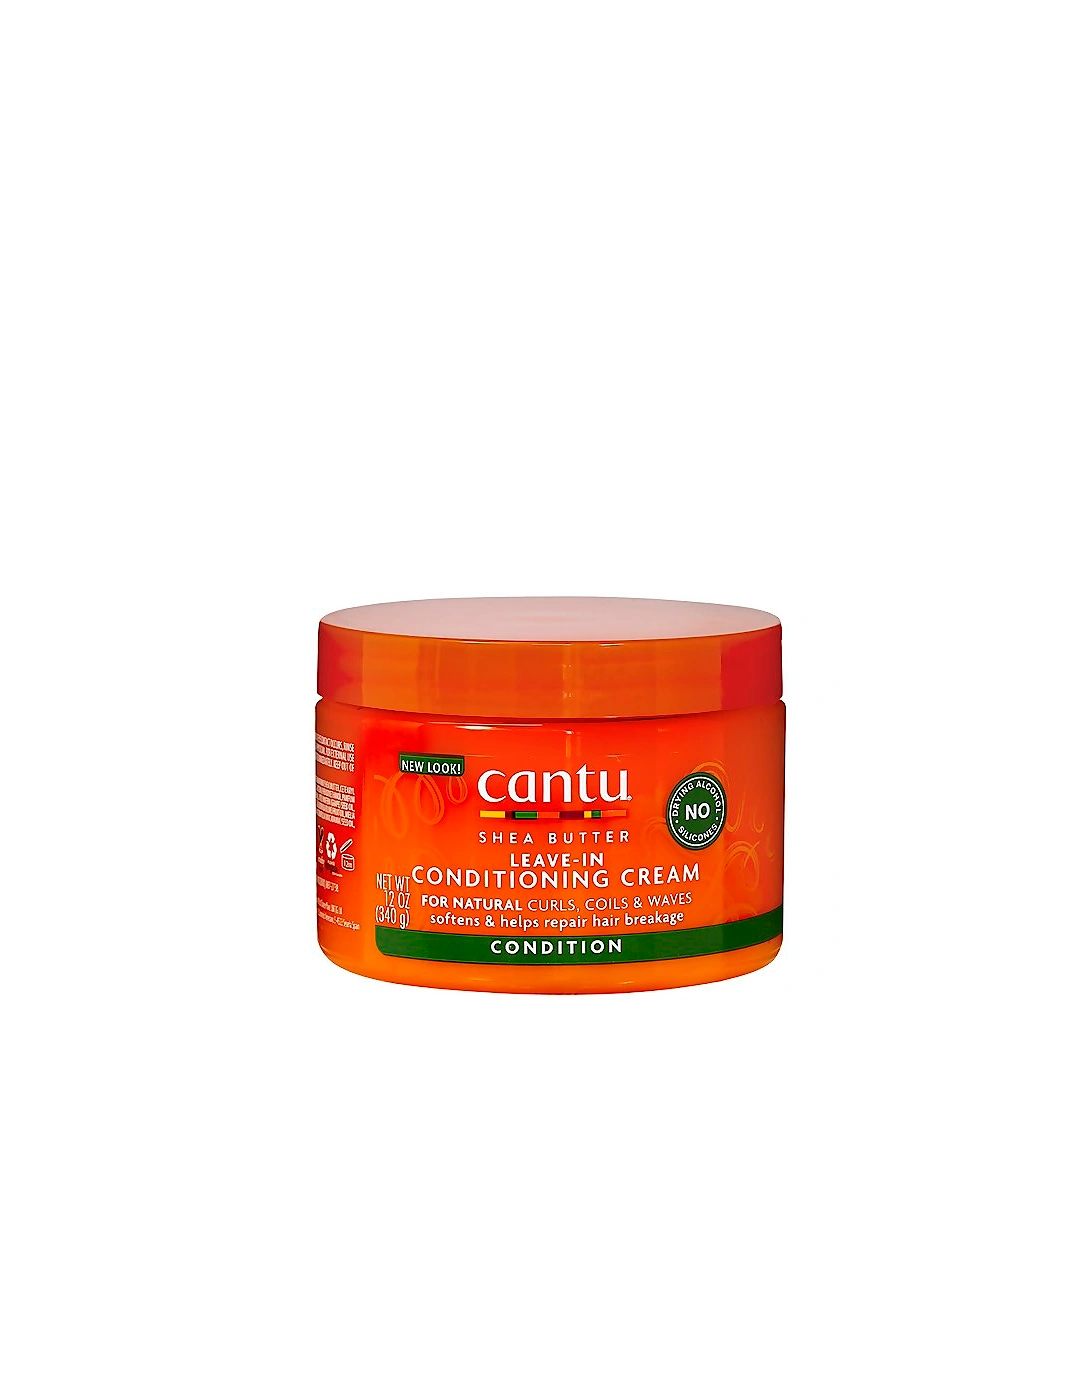 Natural Leave-In Conditioning Cream 340g, 2 of 1